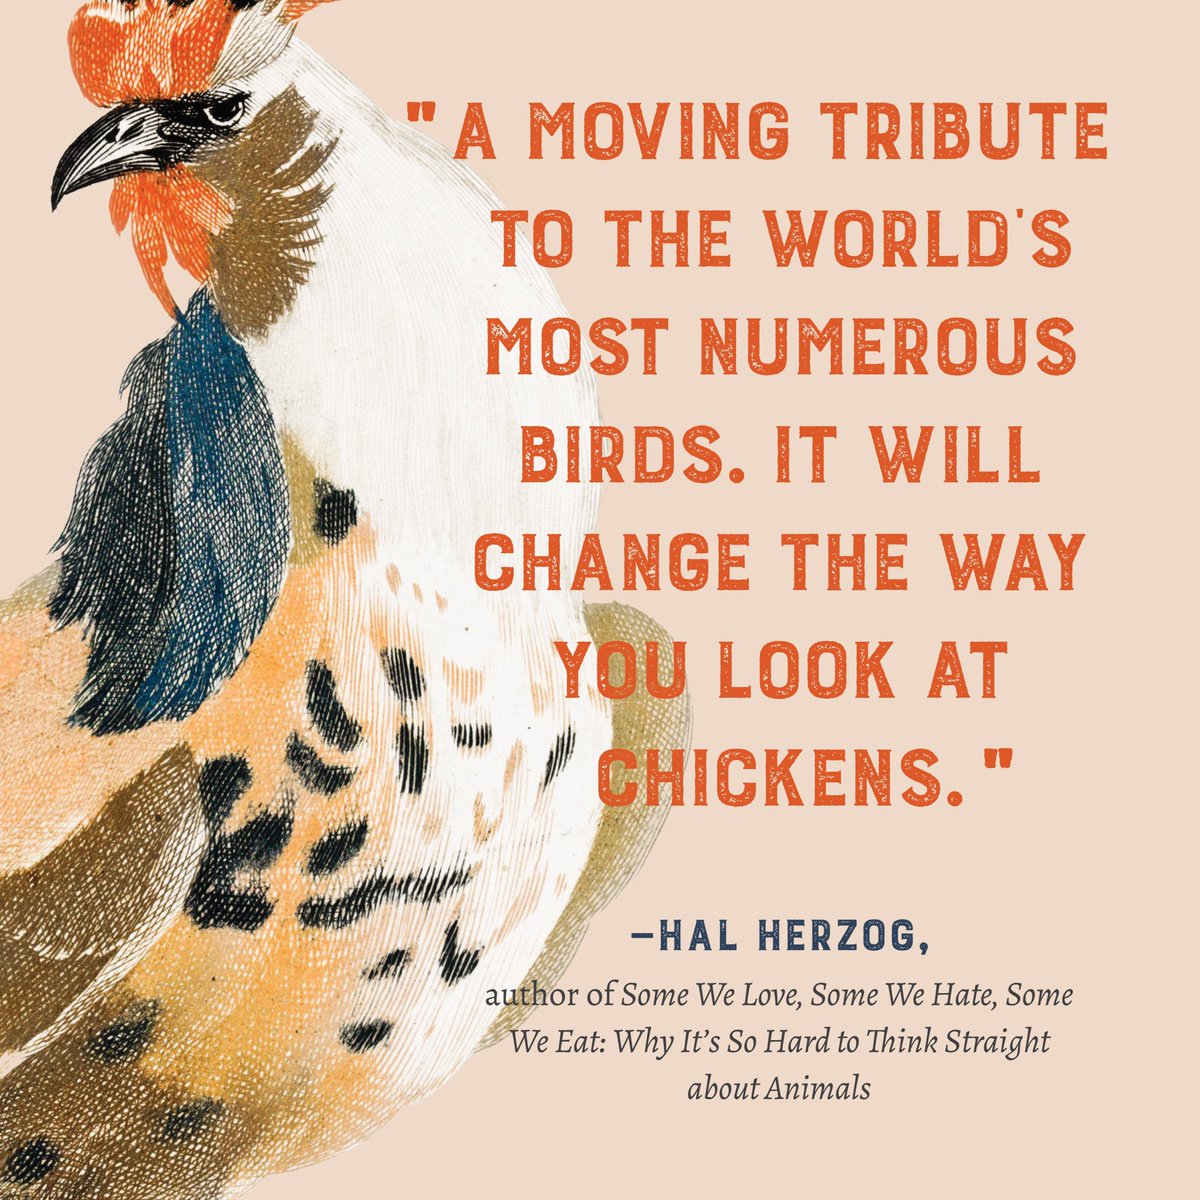 DC! Tonight! Me and @BeeBrookshire at @kramerbooks! My book is very much inspired by a love for backyard chickens but about the birds themselves and what we owe to all animals.